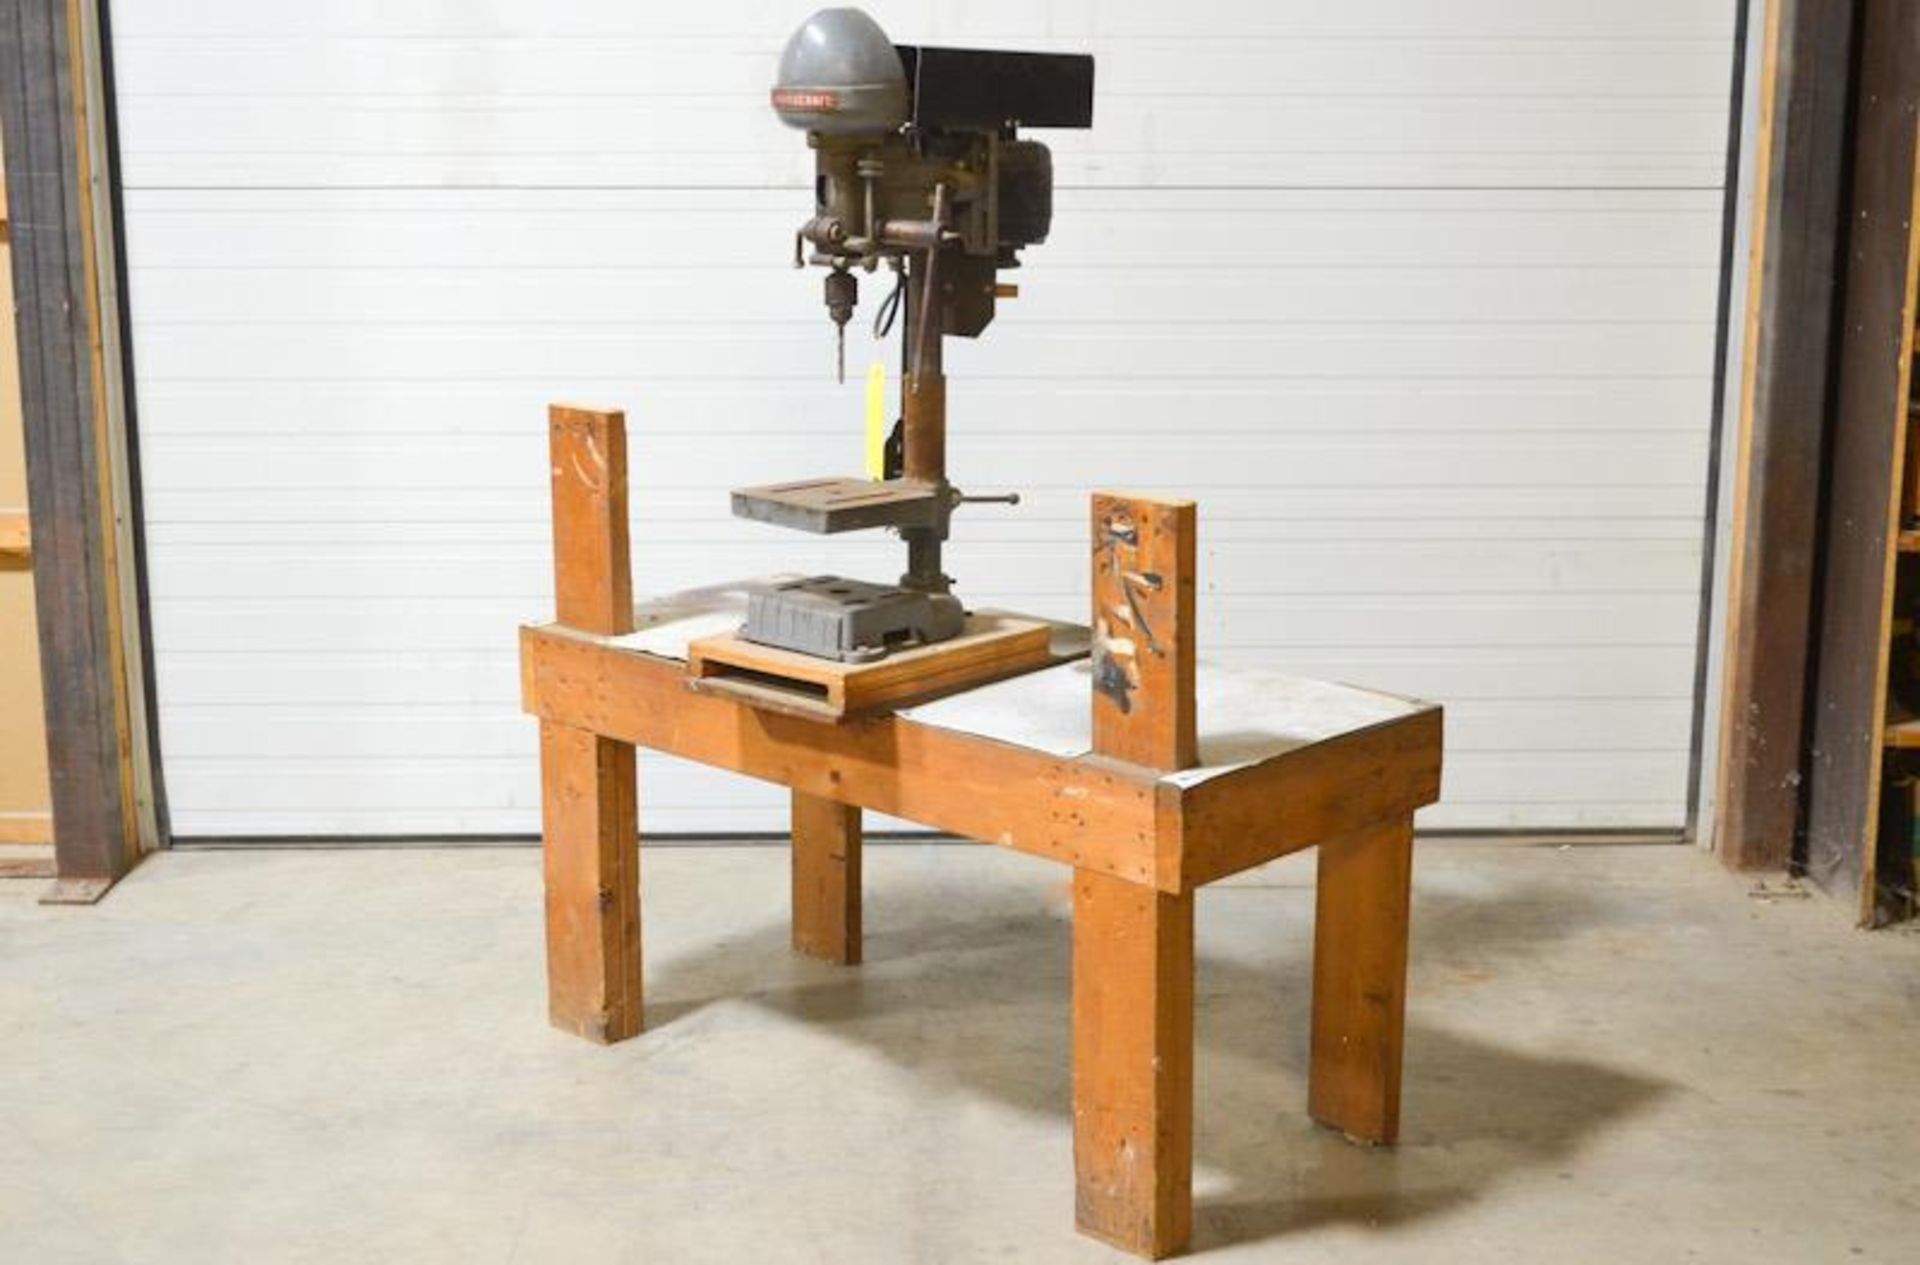 DELTA HOMECRAFT 18” BENCH-TOP DRILL PRESS, 8” X 8” TABLE SIZE, 8” LR X 6.25” FB BASE SIZE, QUILL - Image 2 of 5